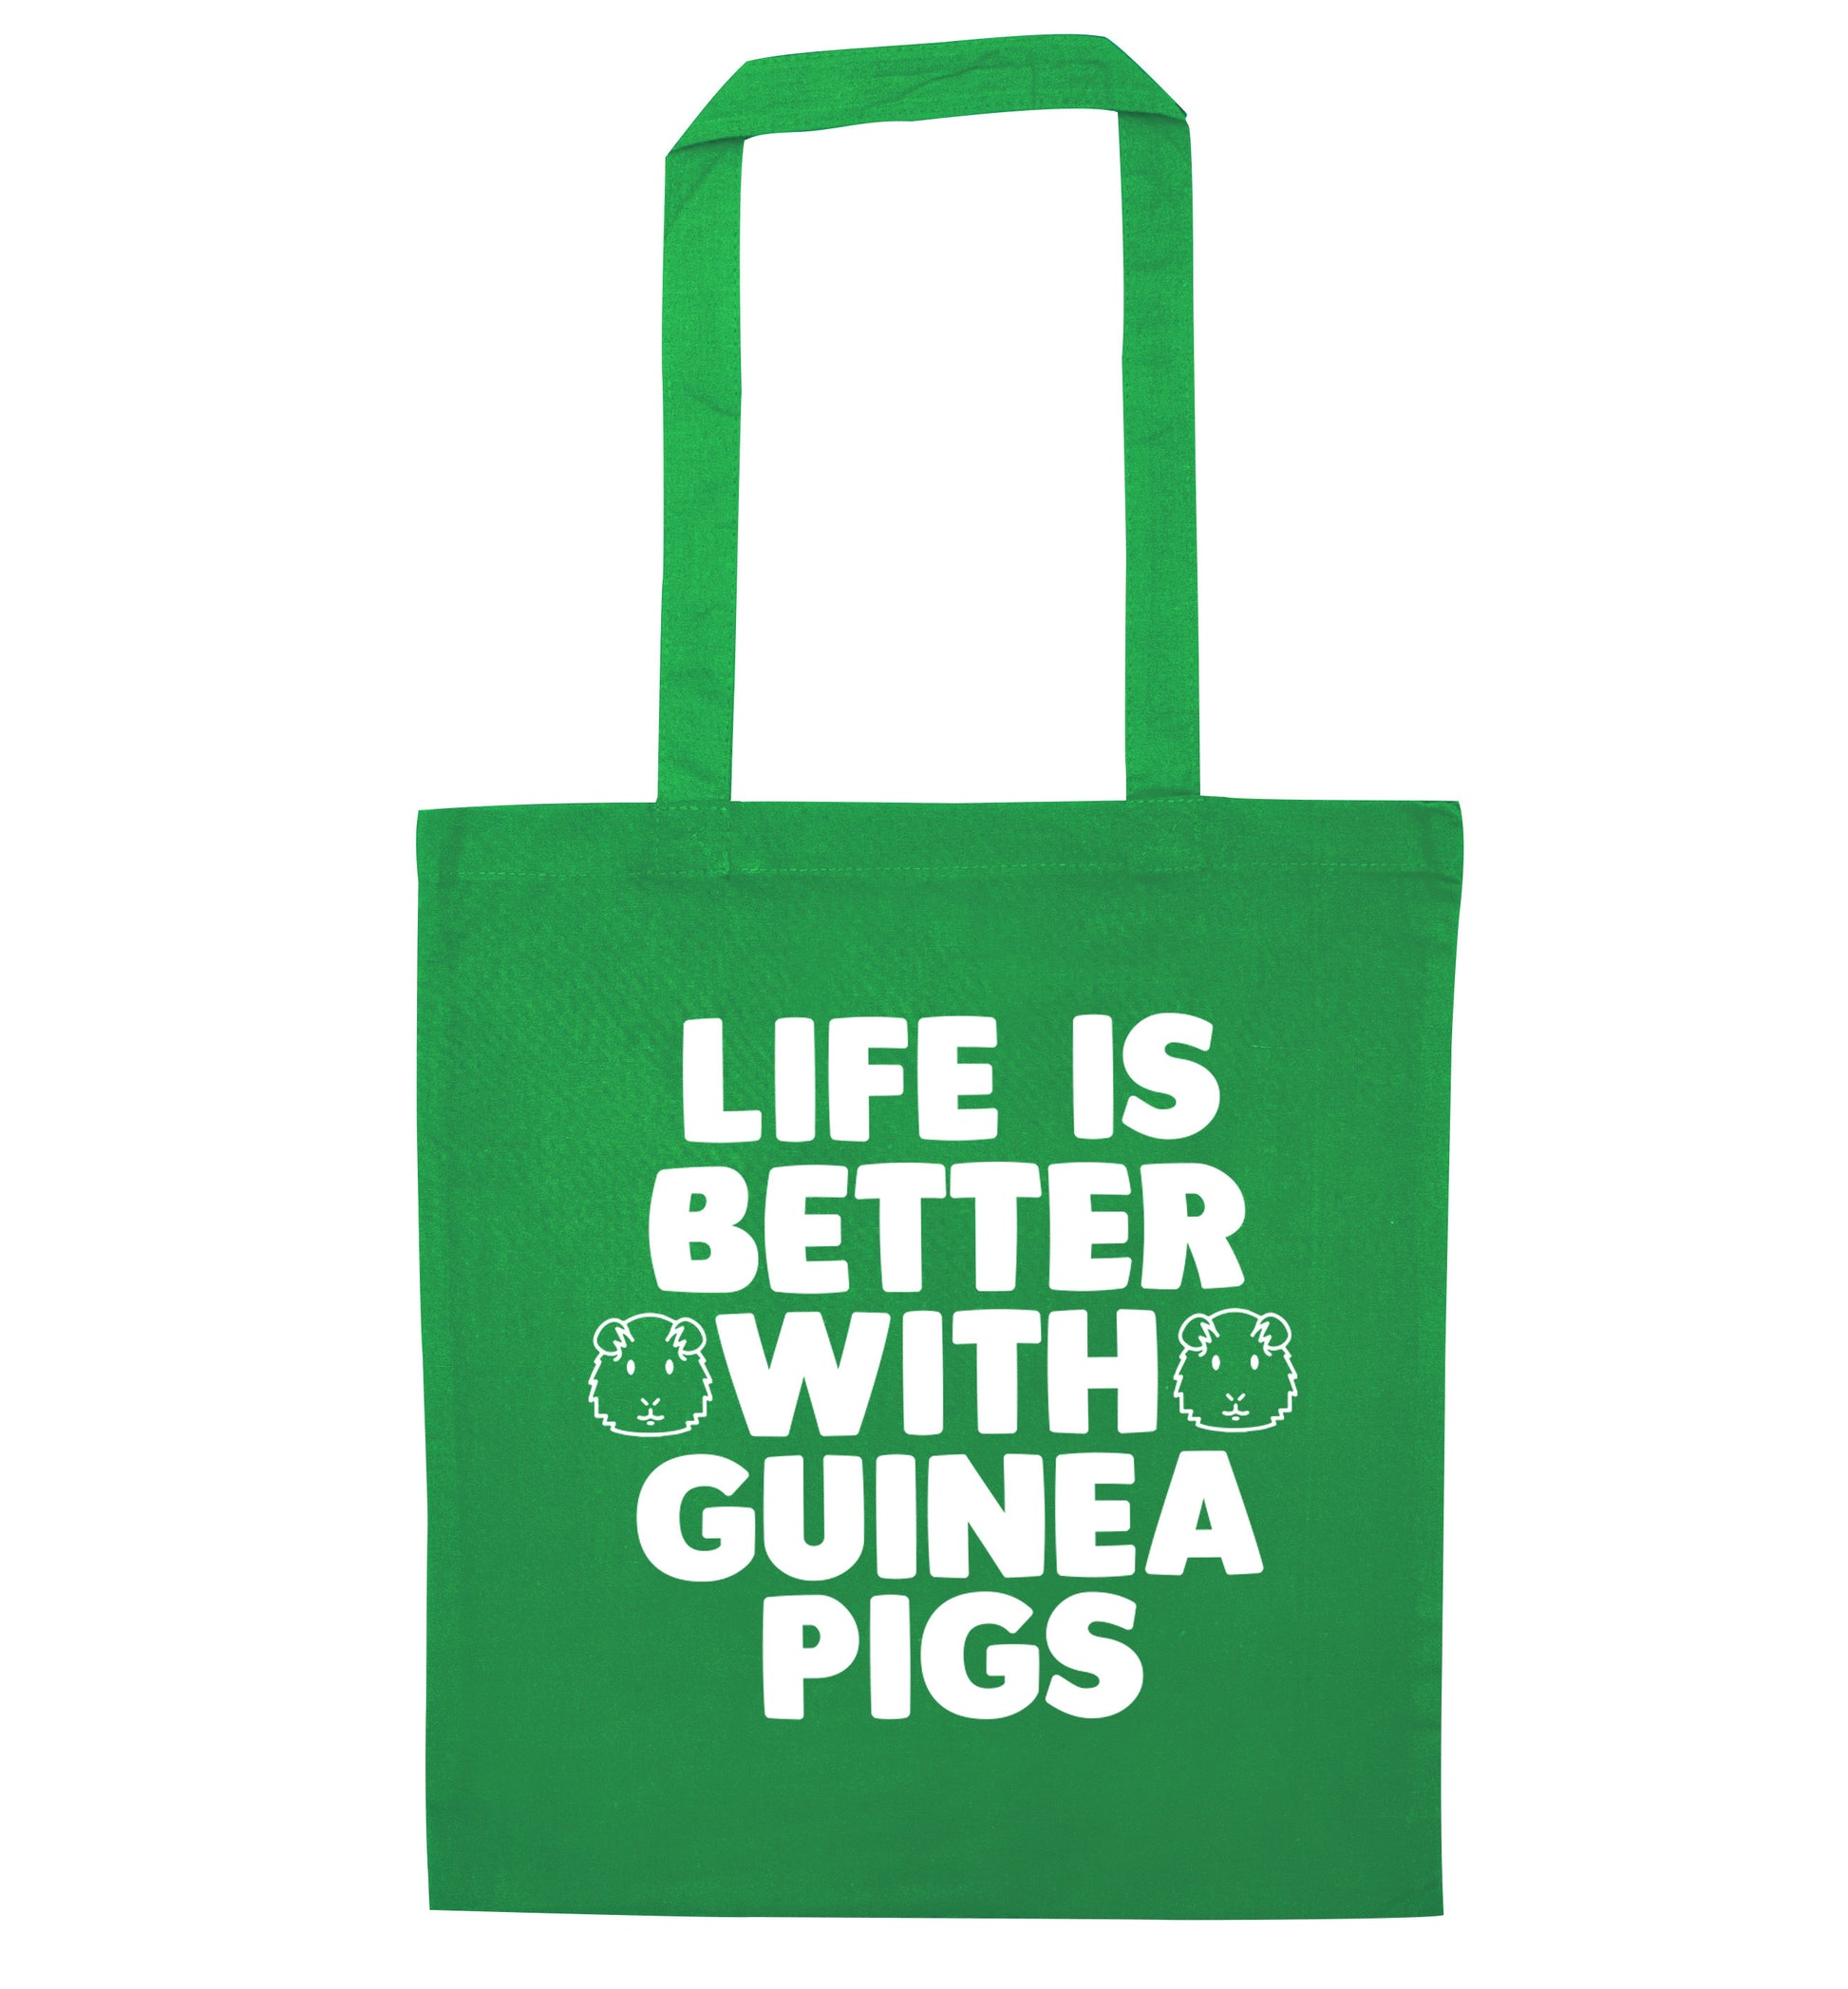 Life is better with guinea pigs green tote bag